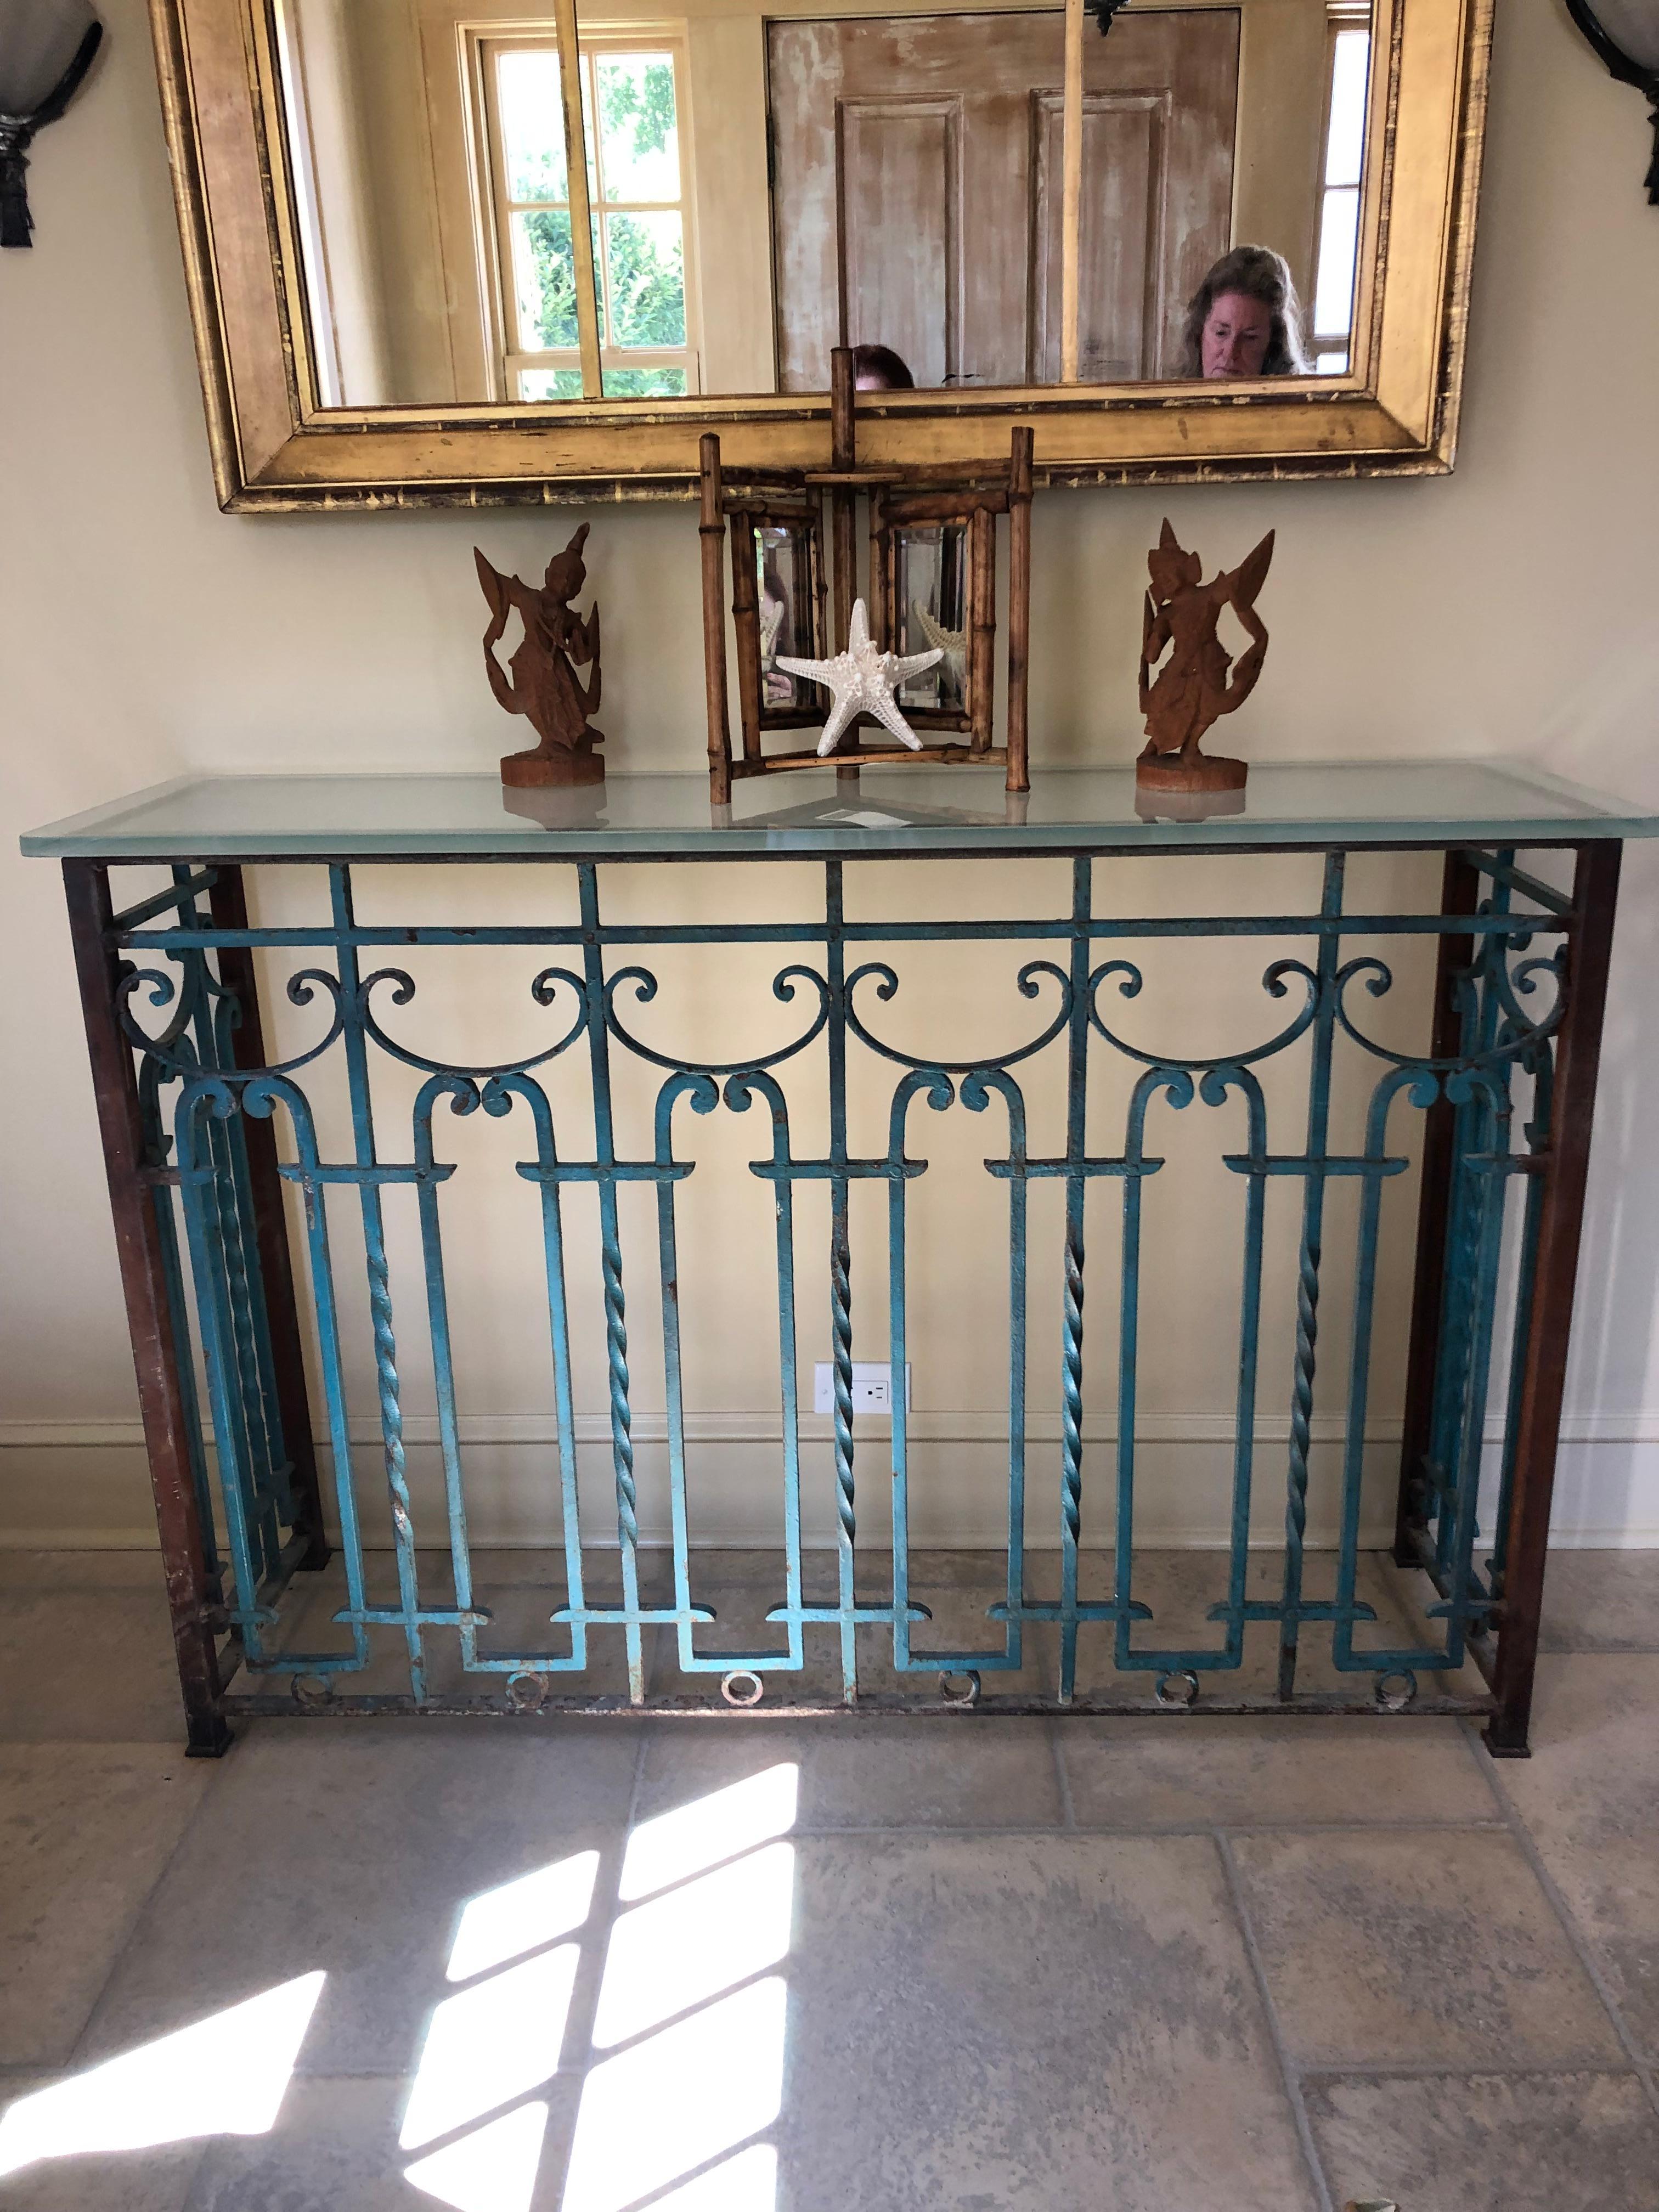 One of a kind show stopper console made from vintage architectural wrought iron grill or fencing having fabulous turquoise and red original chippy paint and topped with a .75